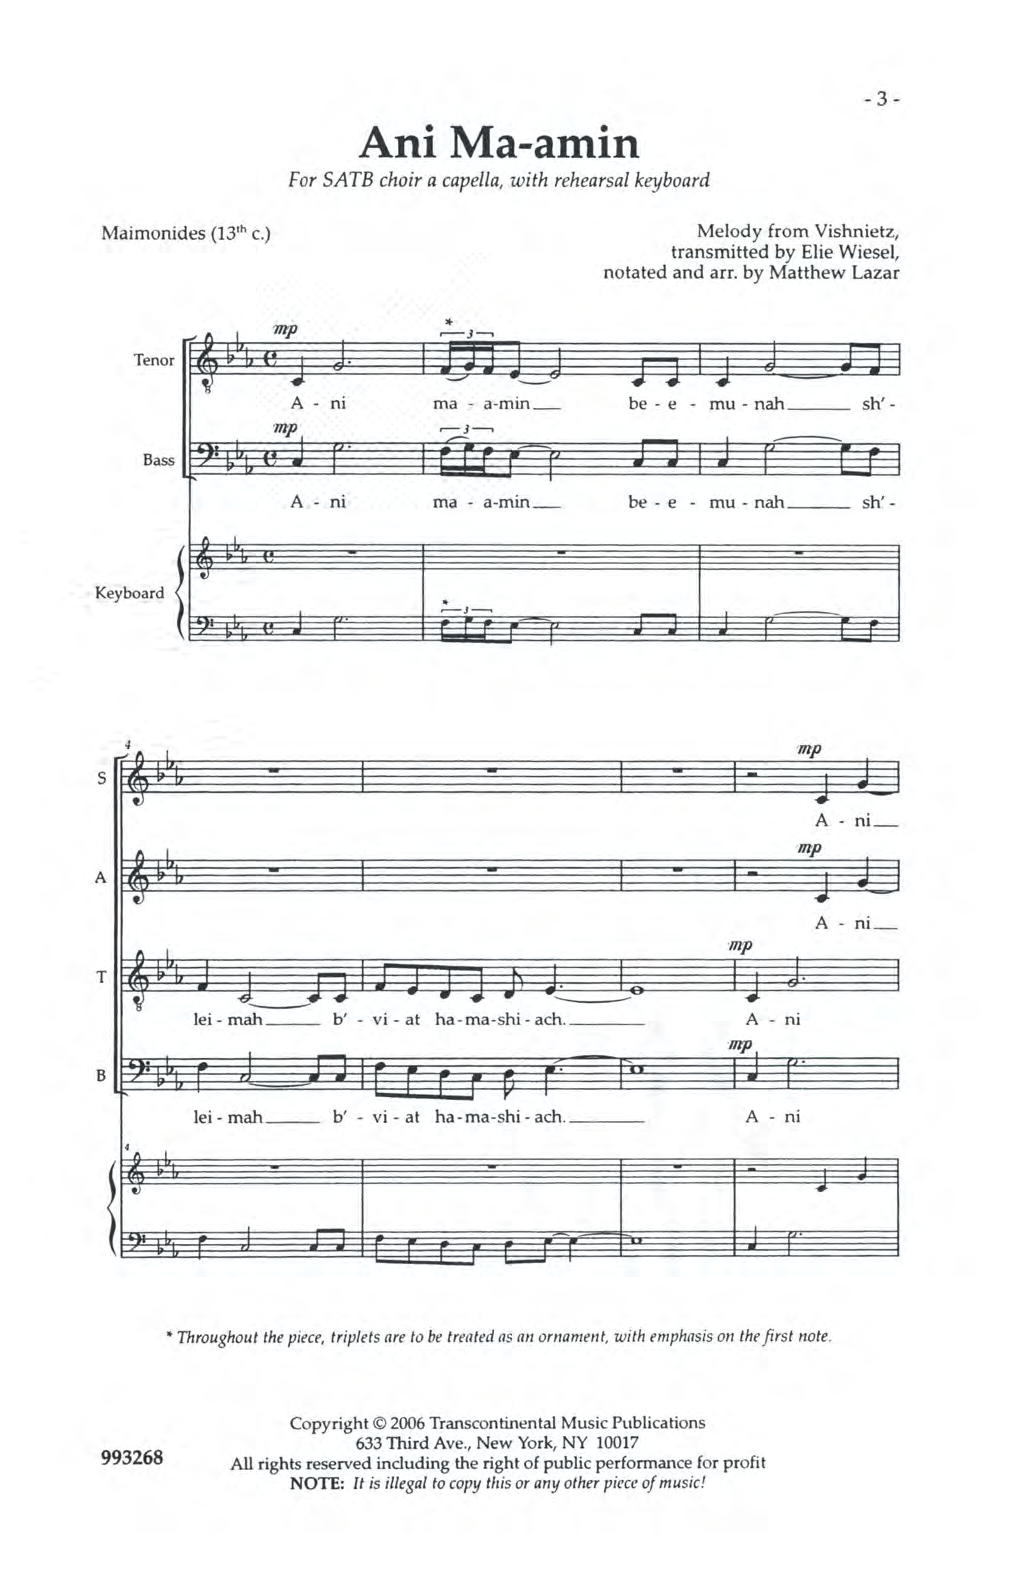 Download Elie Wisel Ani Ma-amin Sheet Music